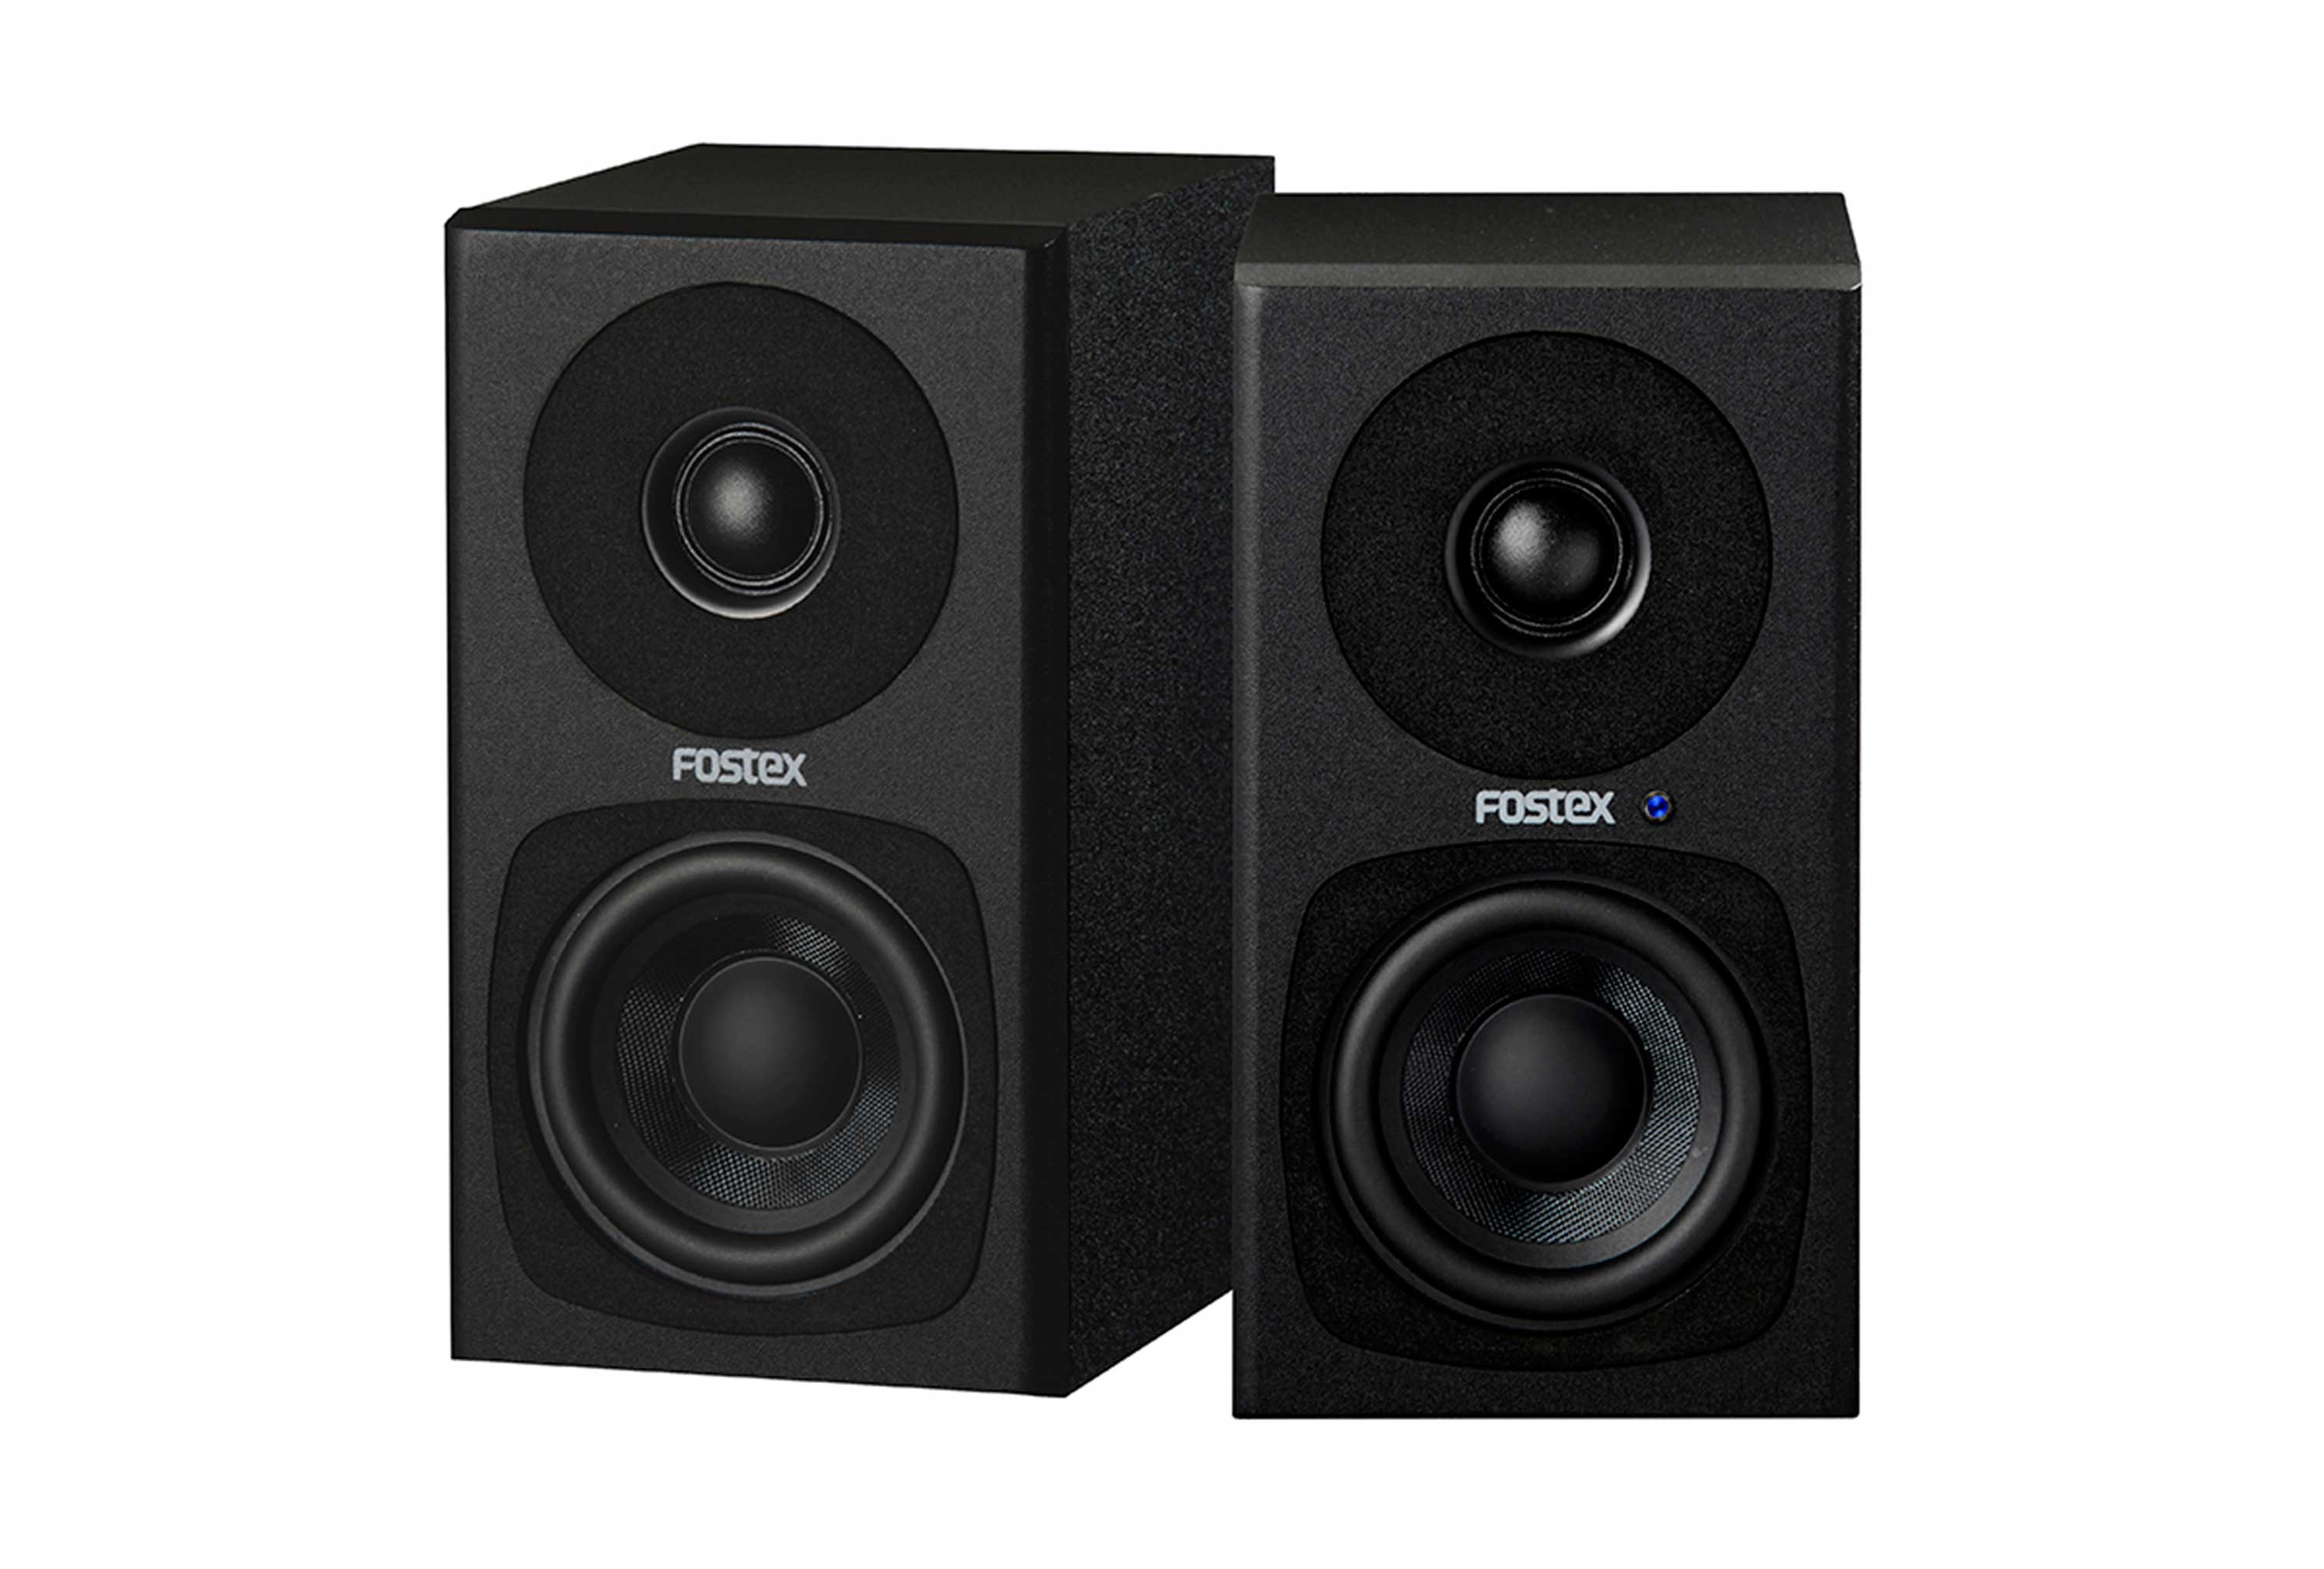 PM0.3H / PM0.3dH : Active Speaker System